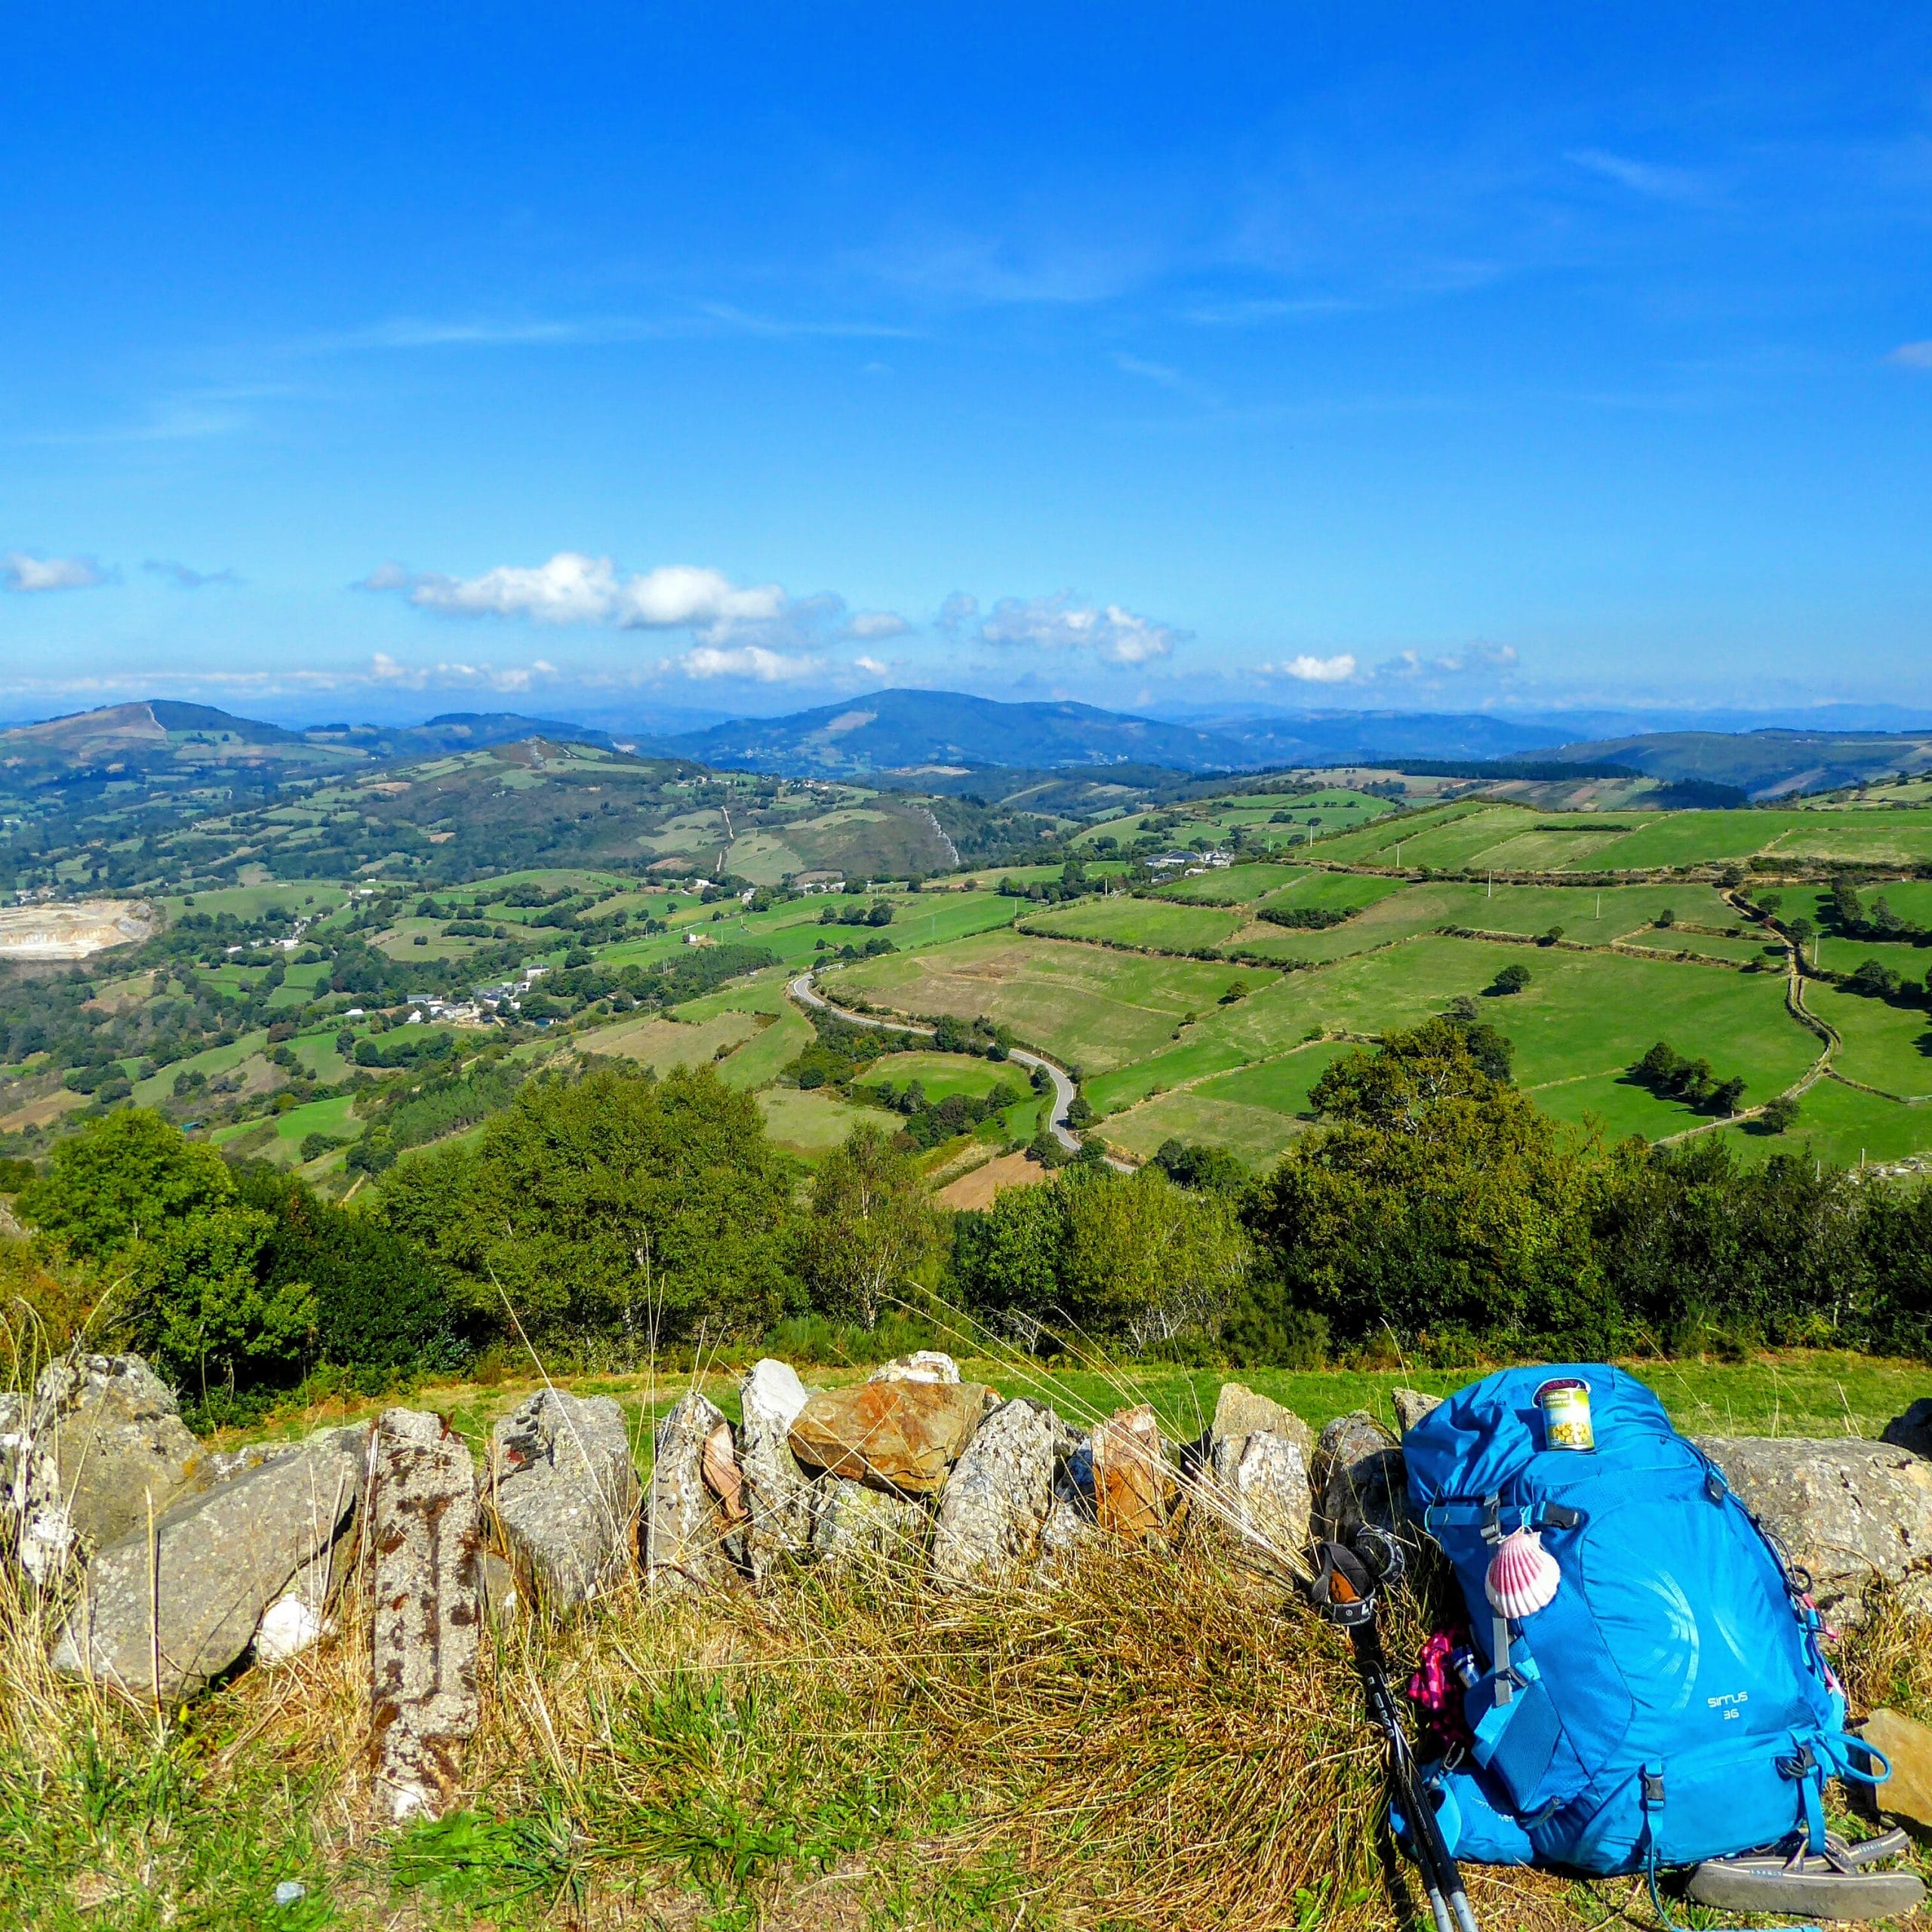 Backpack on the Camino Frances